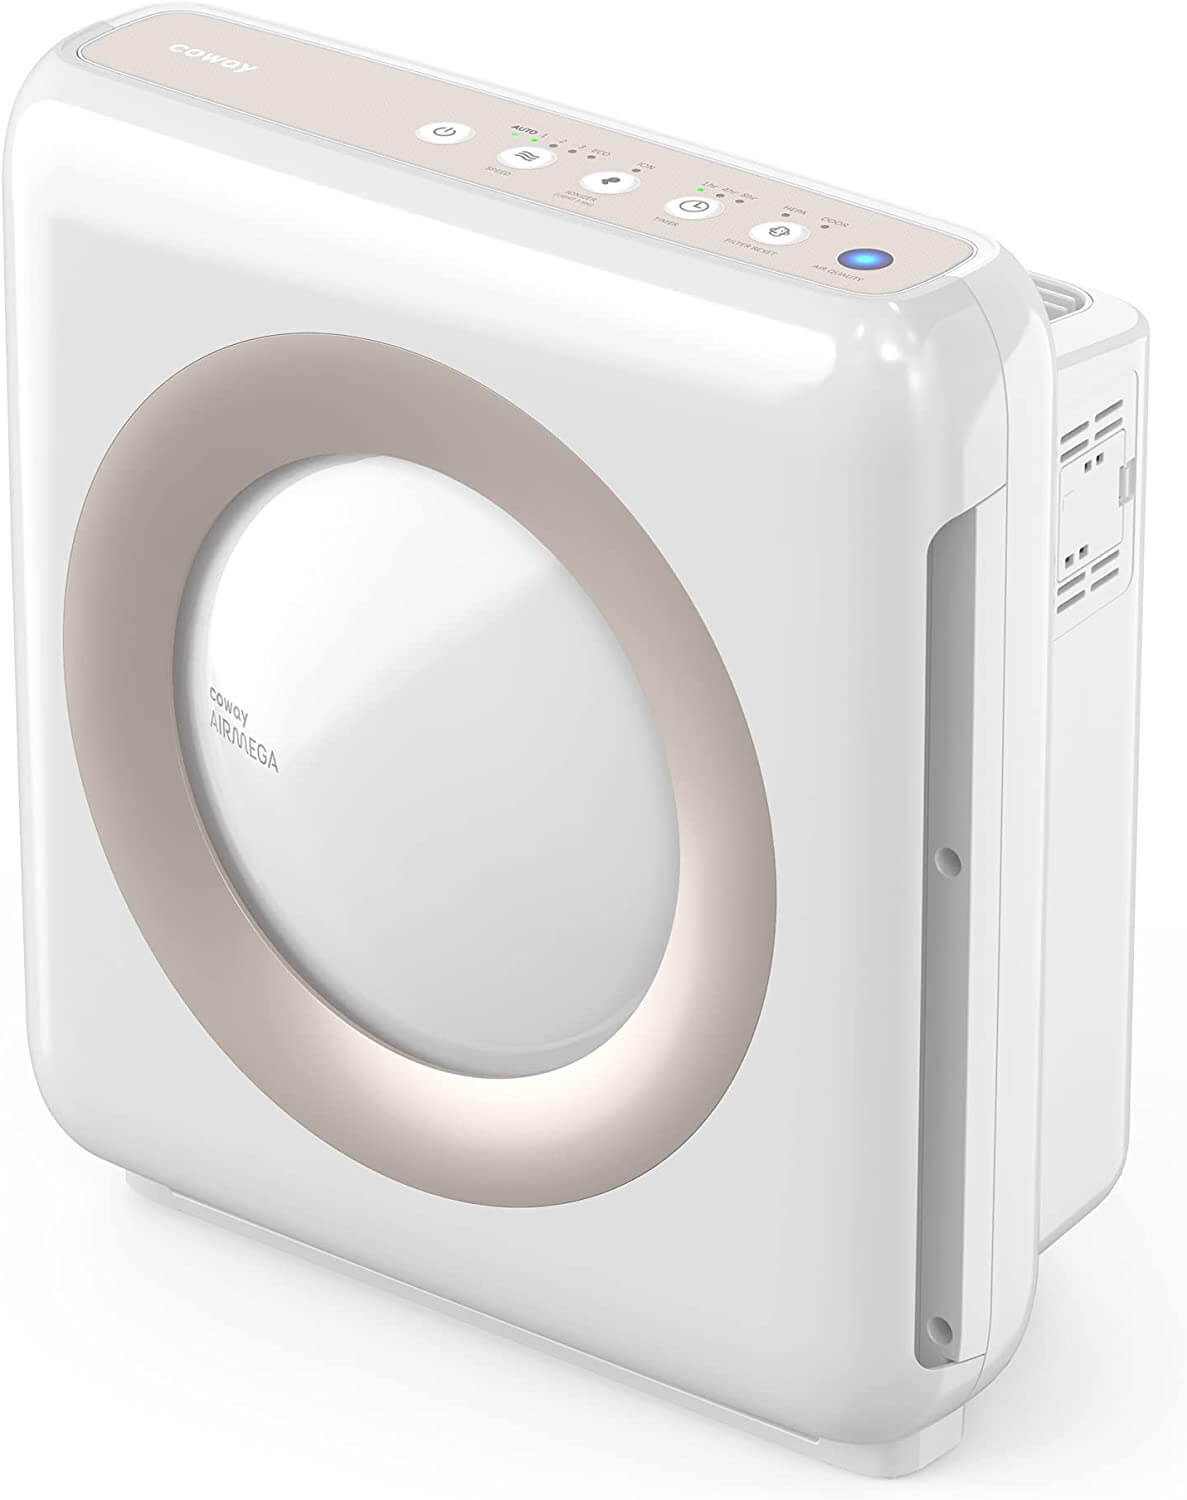 white and beige square shaped air purifier 